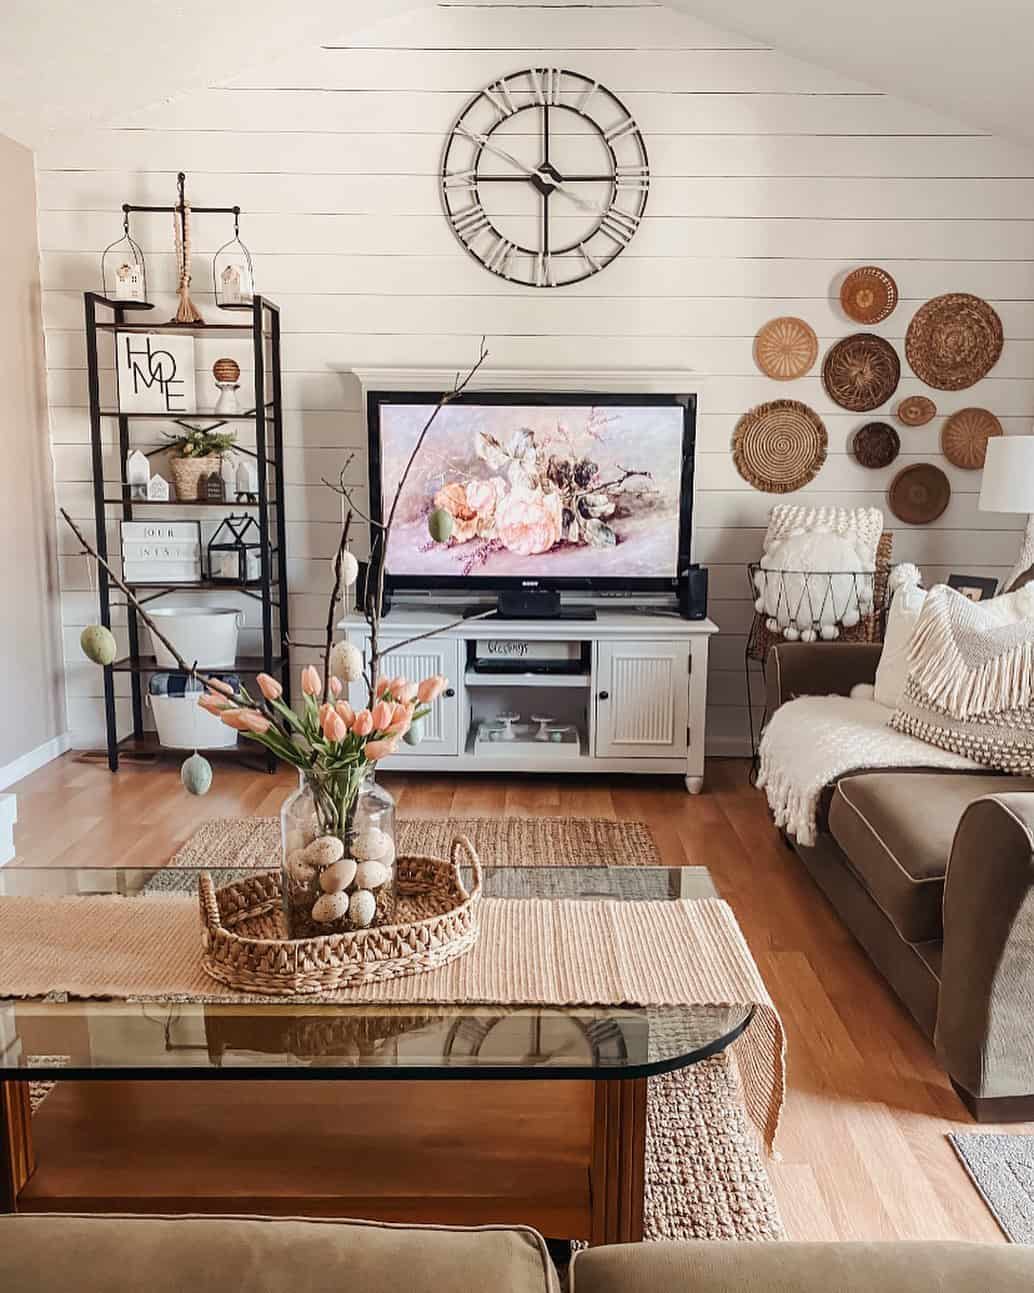 Top 10 Small Living Room Ideas For Your Home